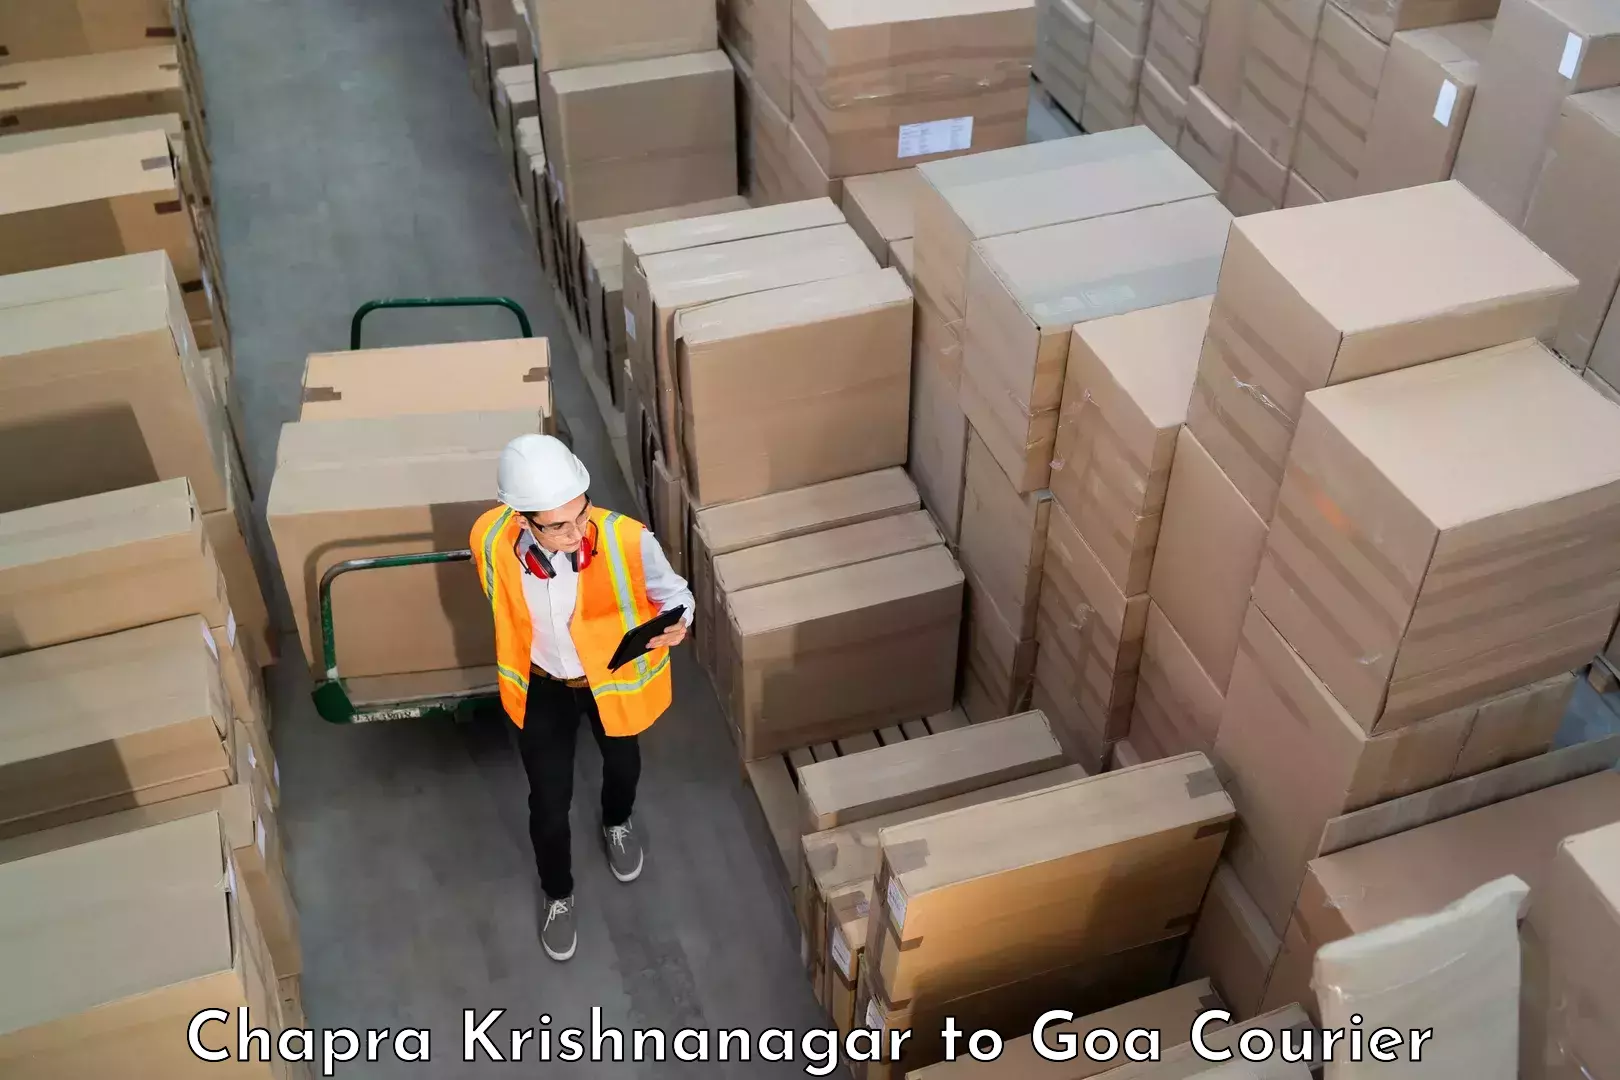 Baggage delivery scheduling Chapra Krishnanagar to Goa